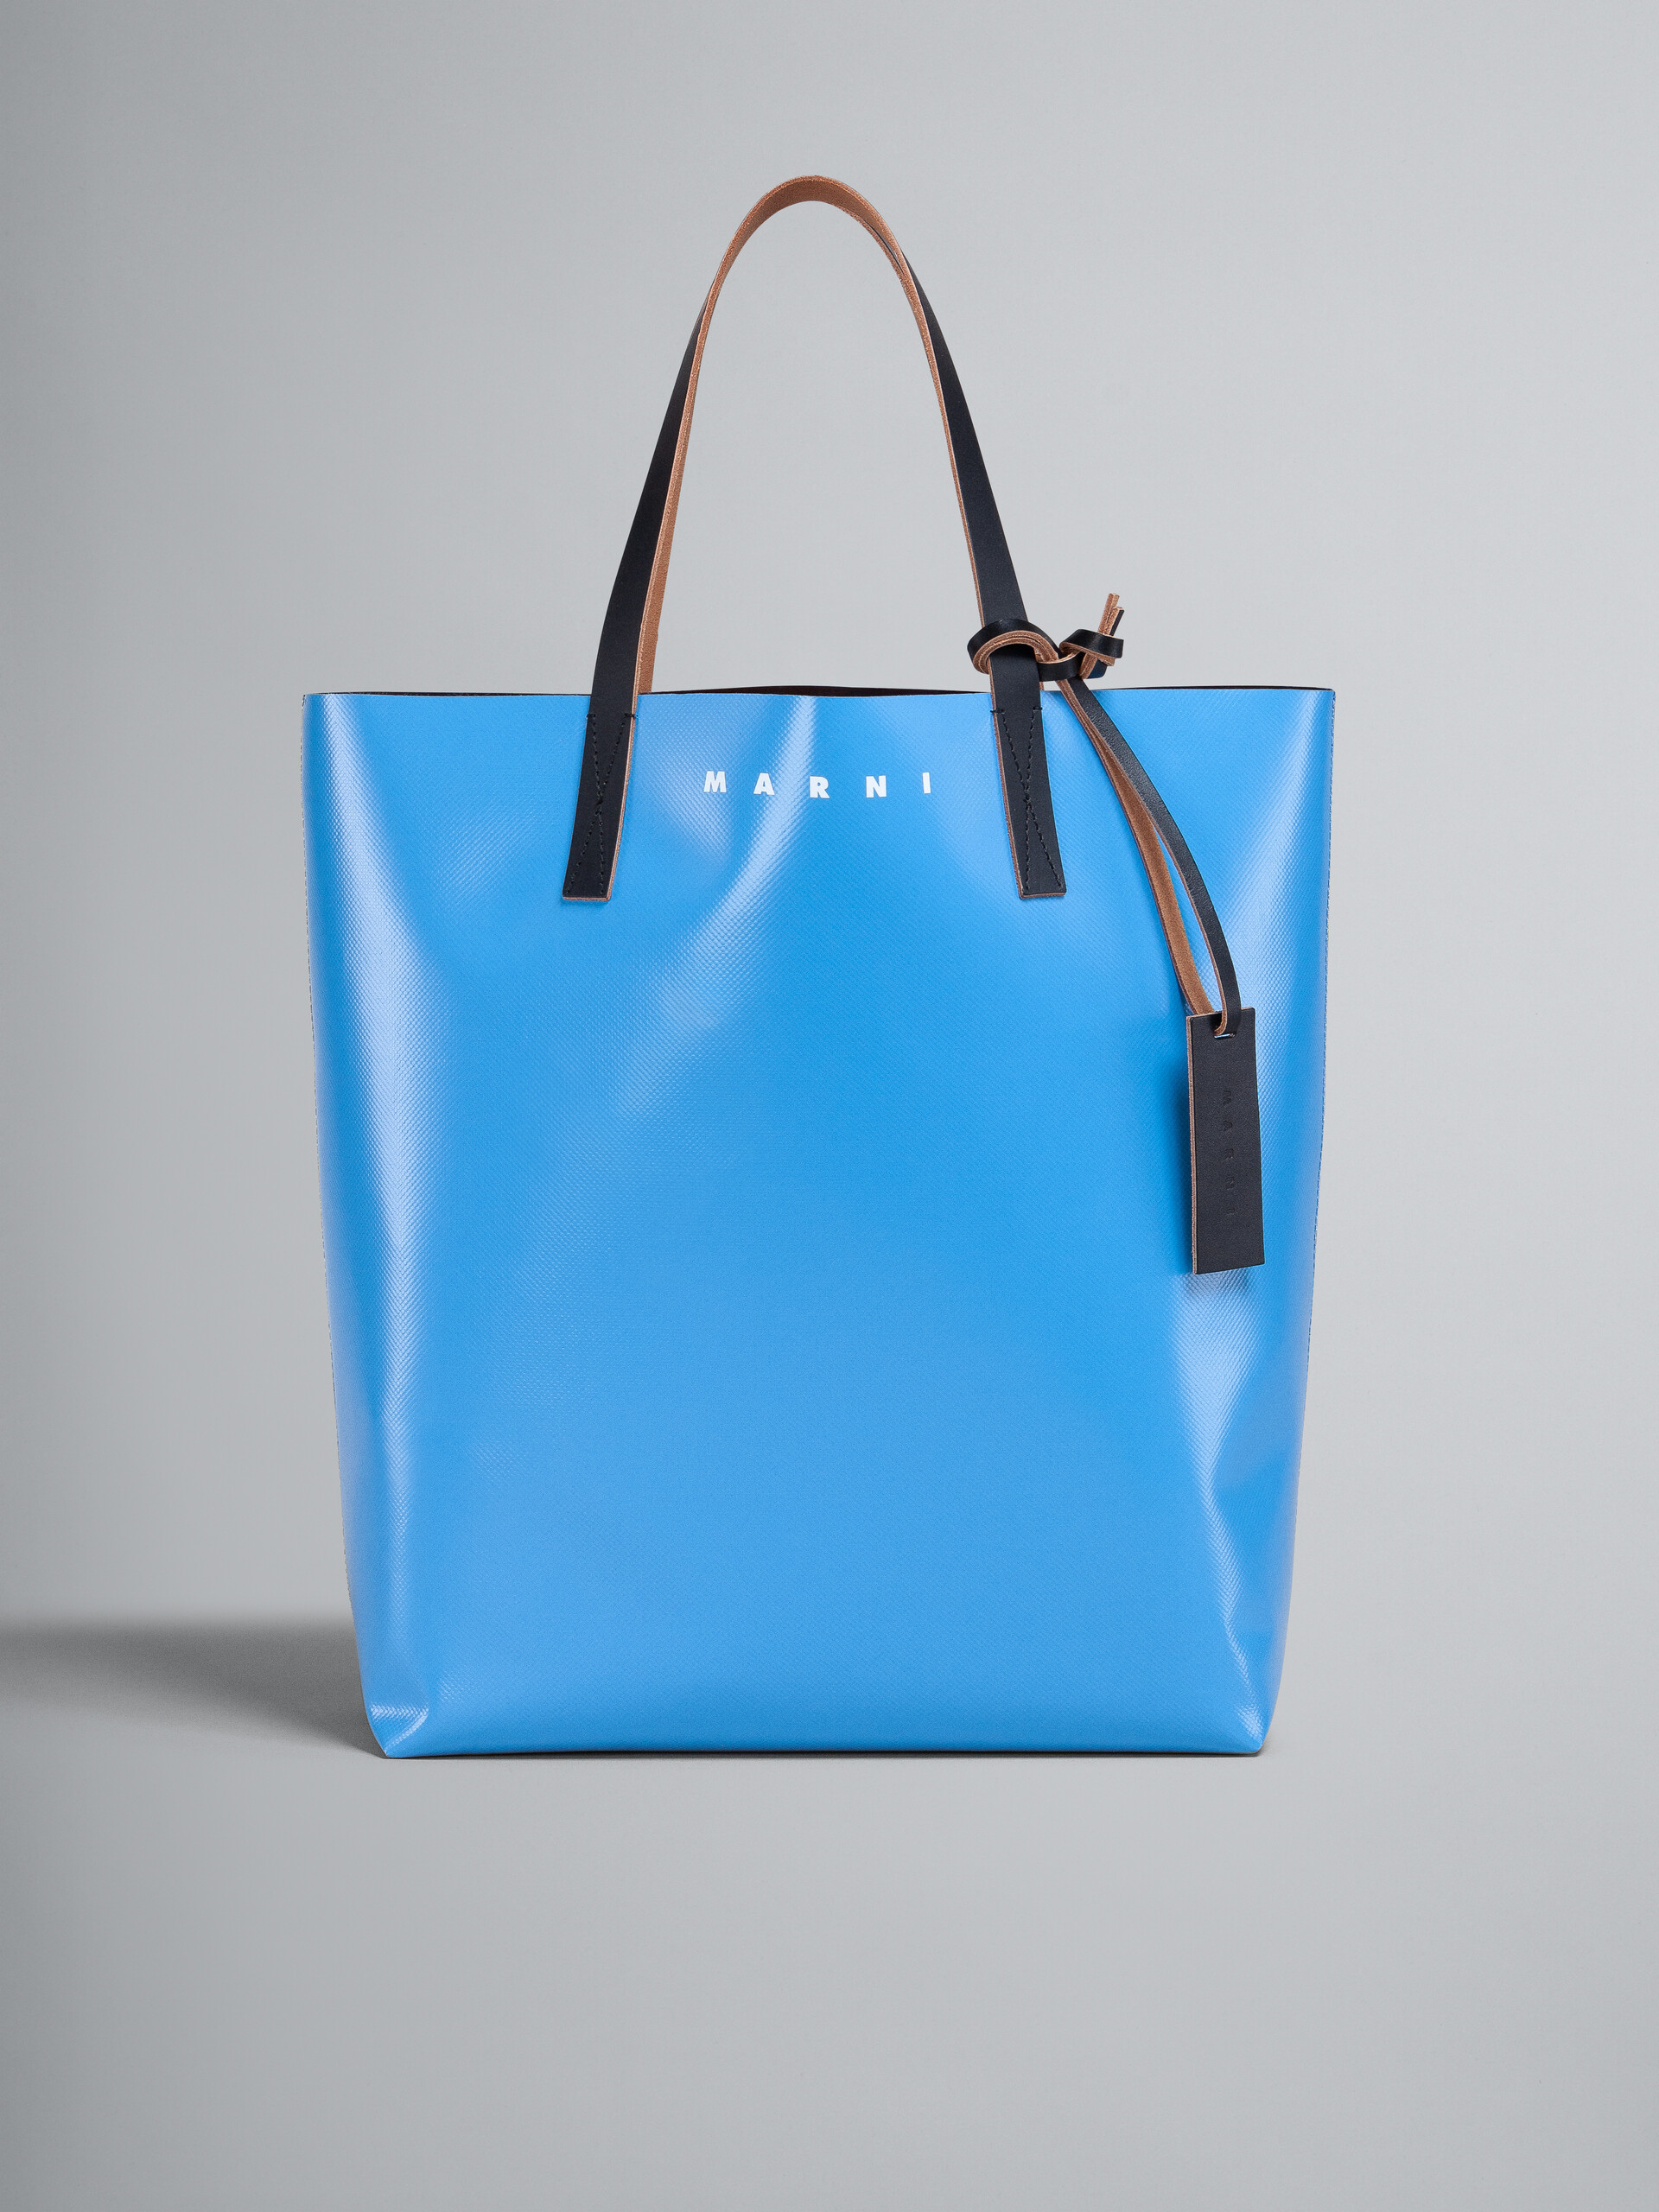 Brown and pale blue TRIBECA PVC shopping bag - Shopping Bags - Image 1